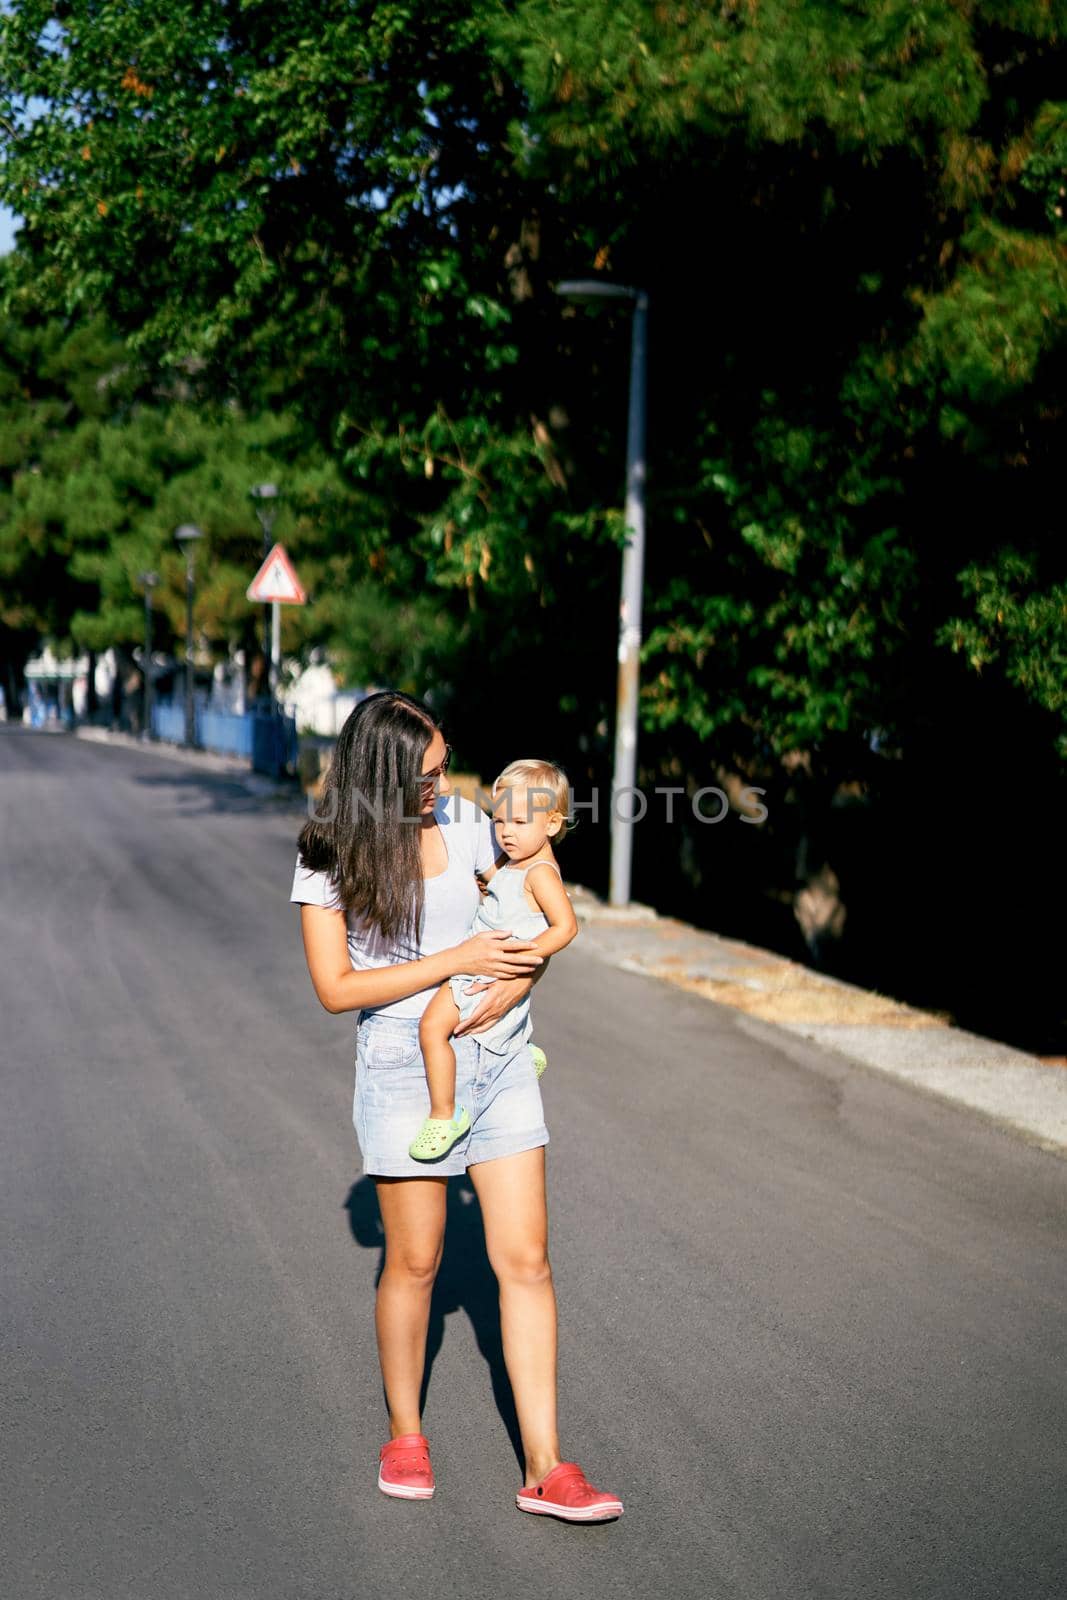 Mom carries a little girl in her arms walking along the road. High quality photo